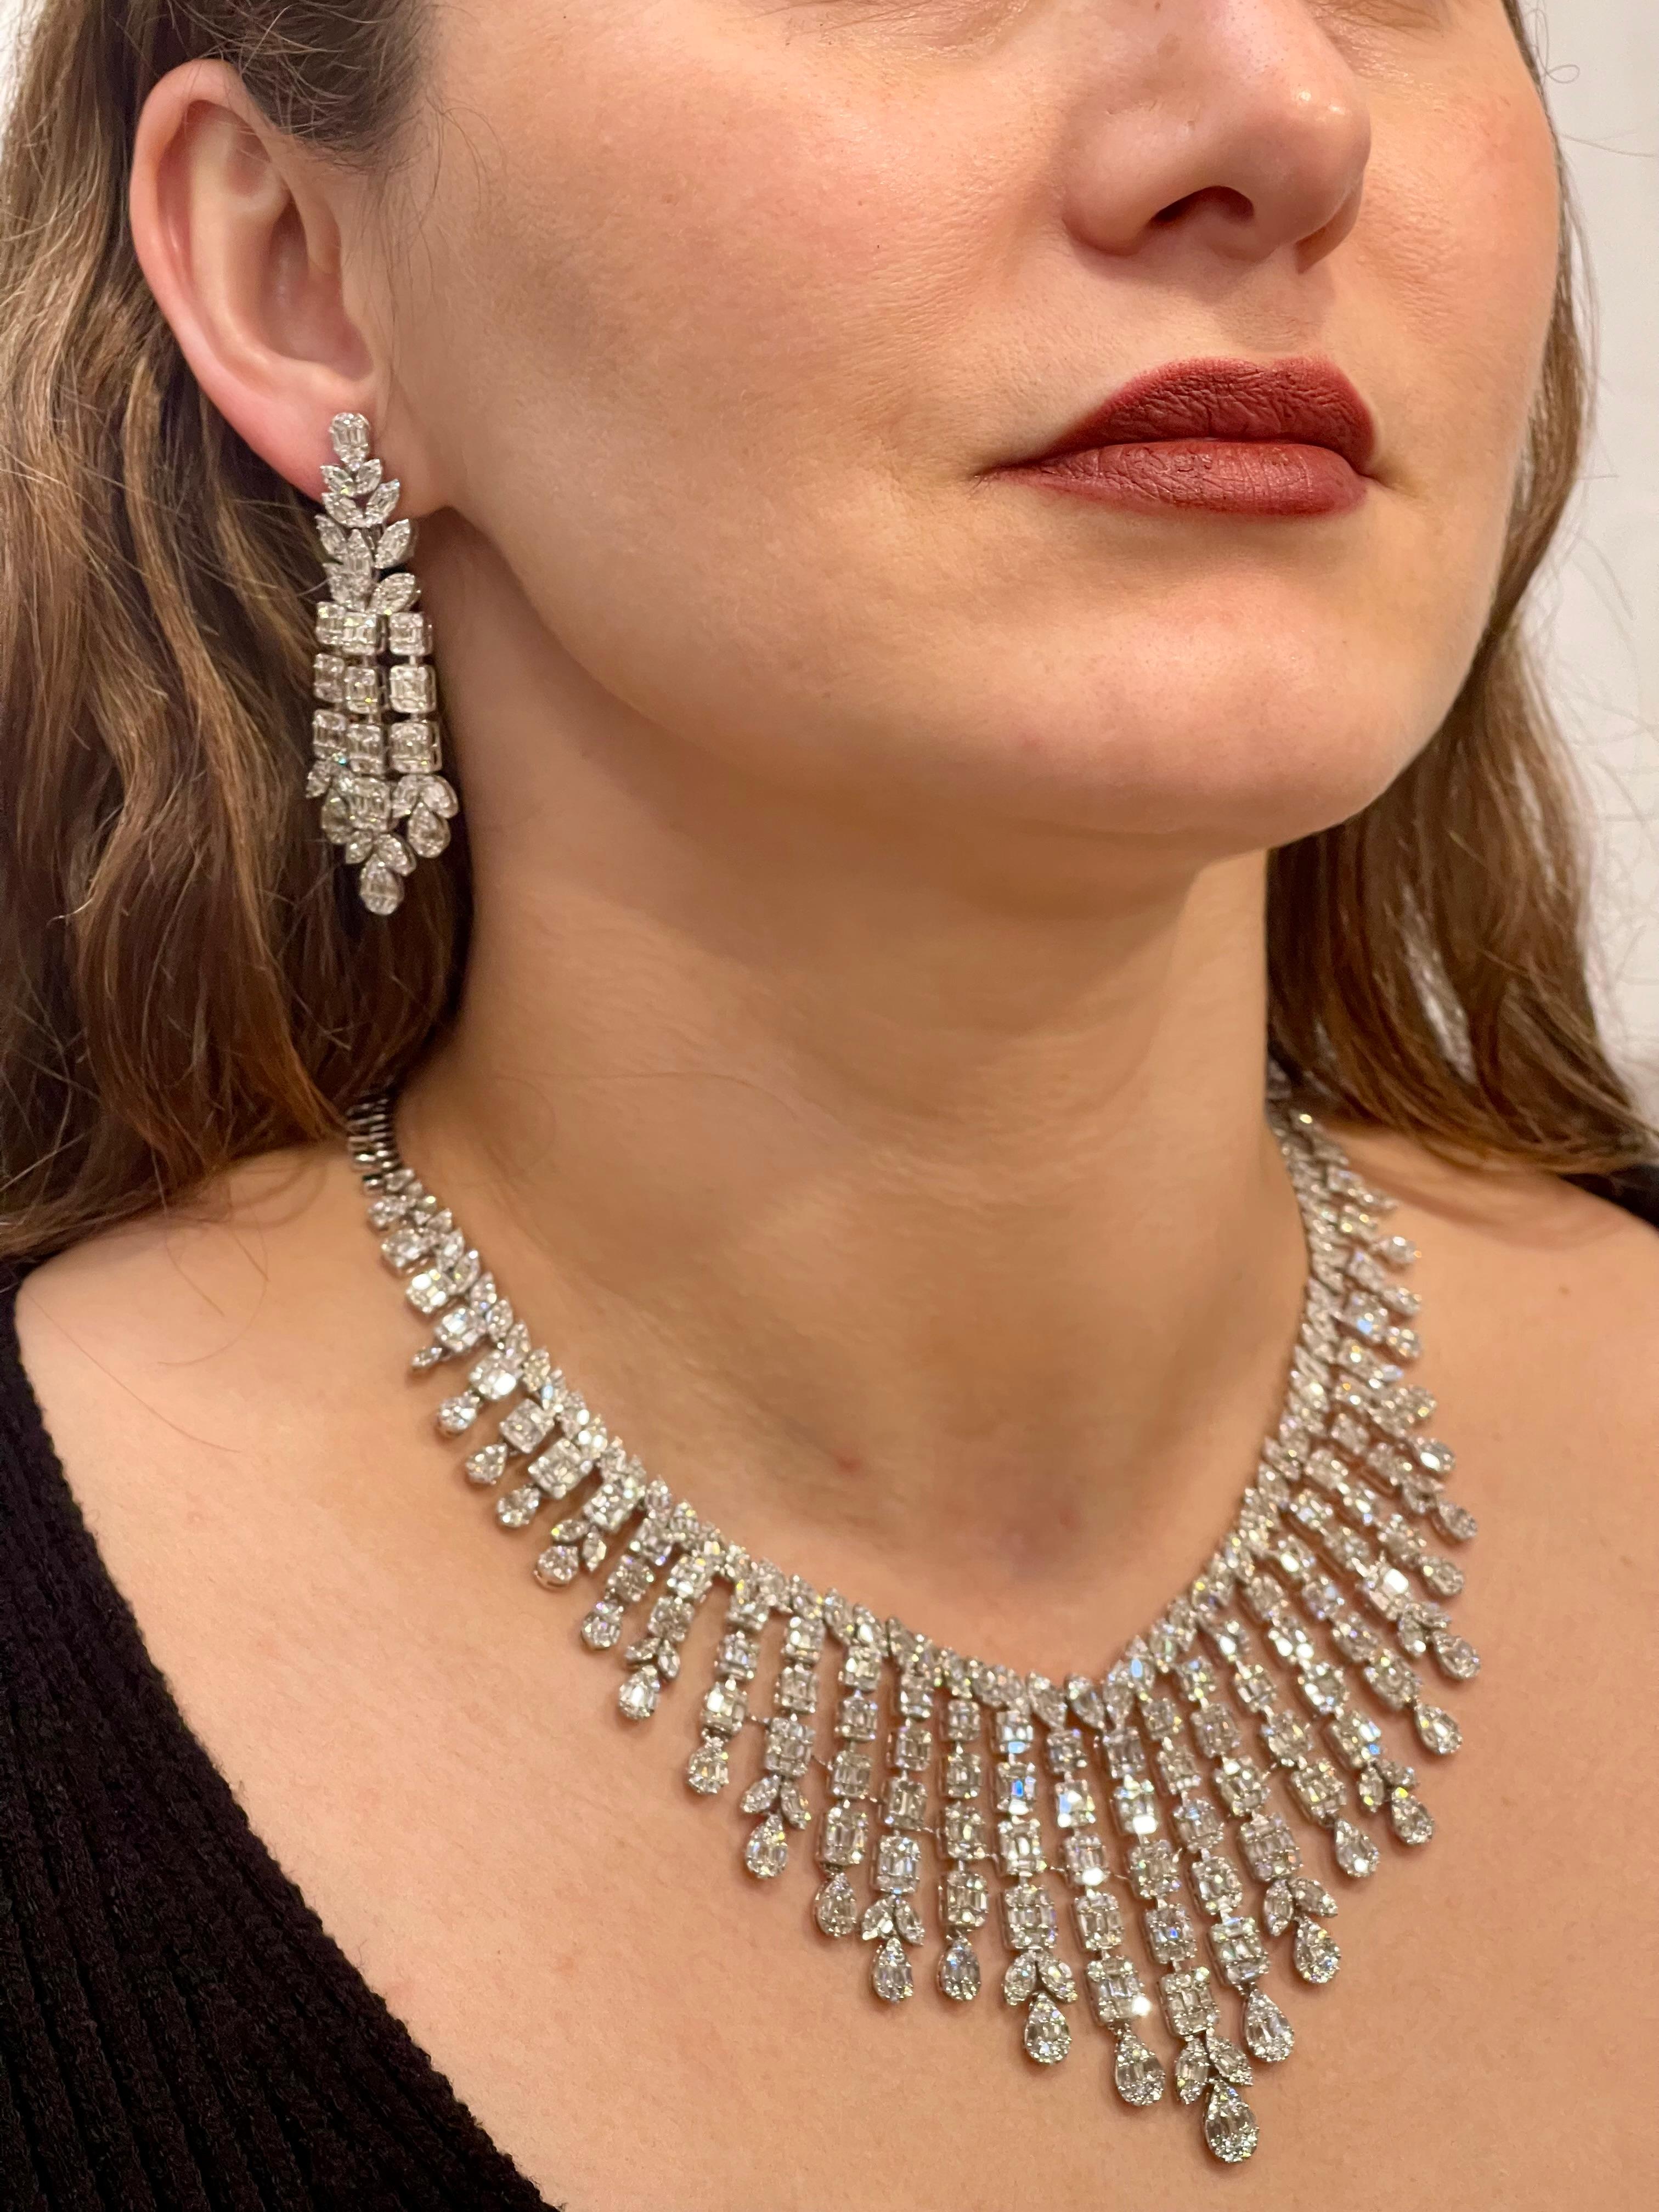 
One of our premium necklace from our Bridal collection.
45 carats of VS quality of Diamonds all mounted in 18 karat gold. Weight of the gold is  110 grams. Matching  dangling earrings are part f the set  .  There are round and Baguettes shape